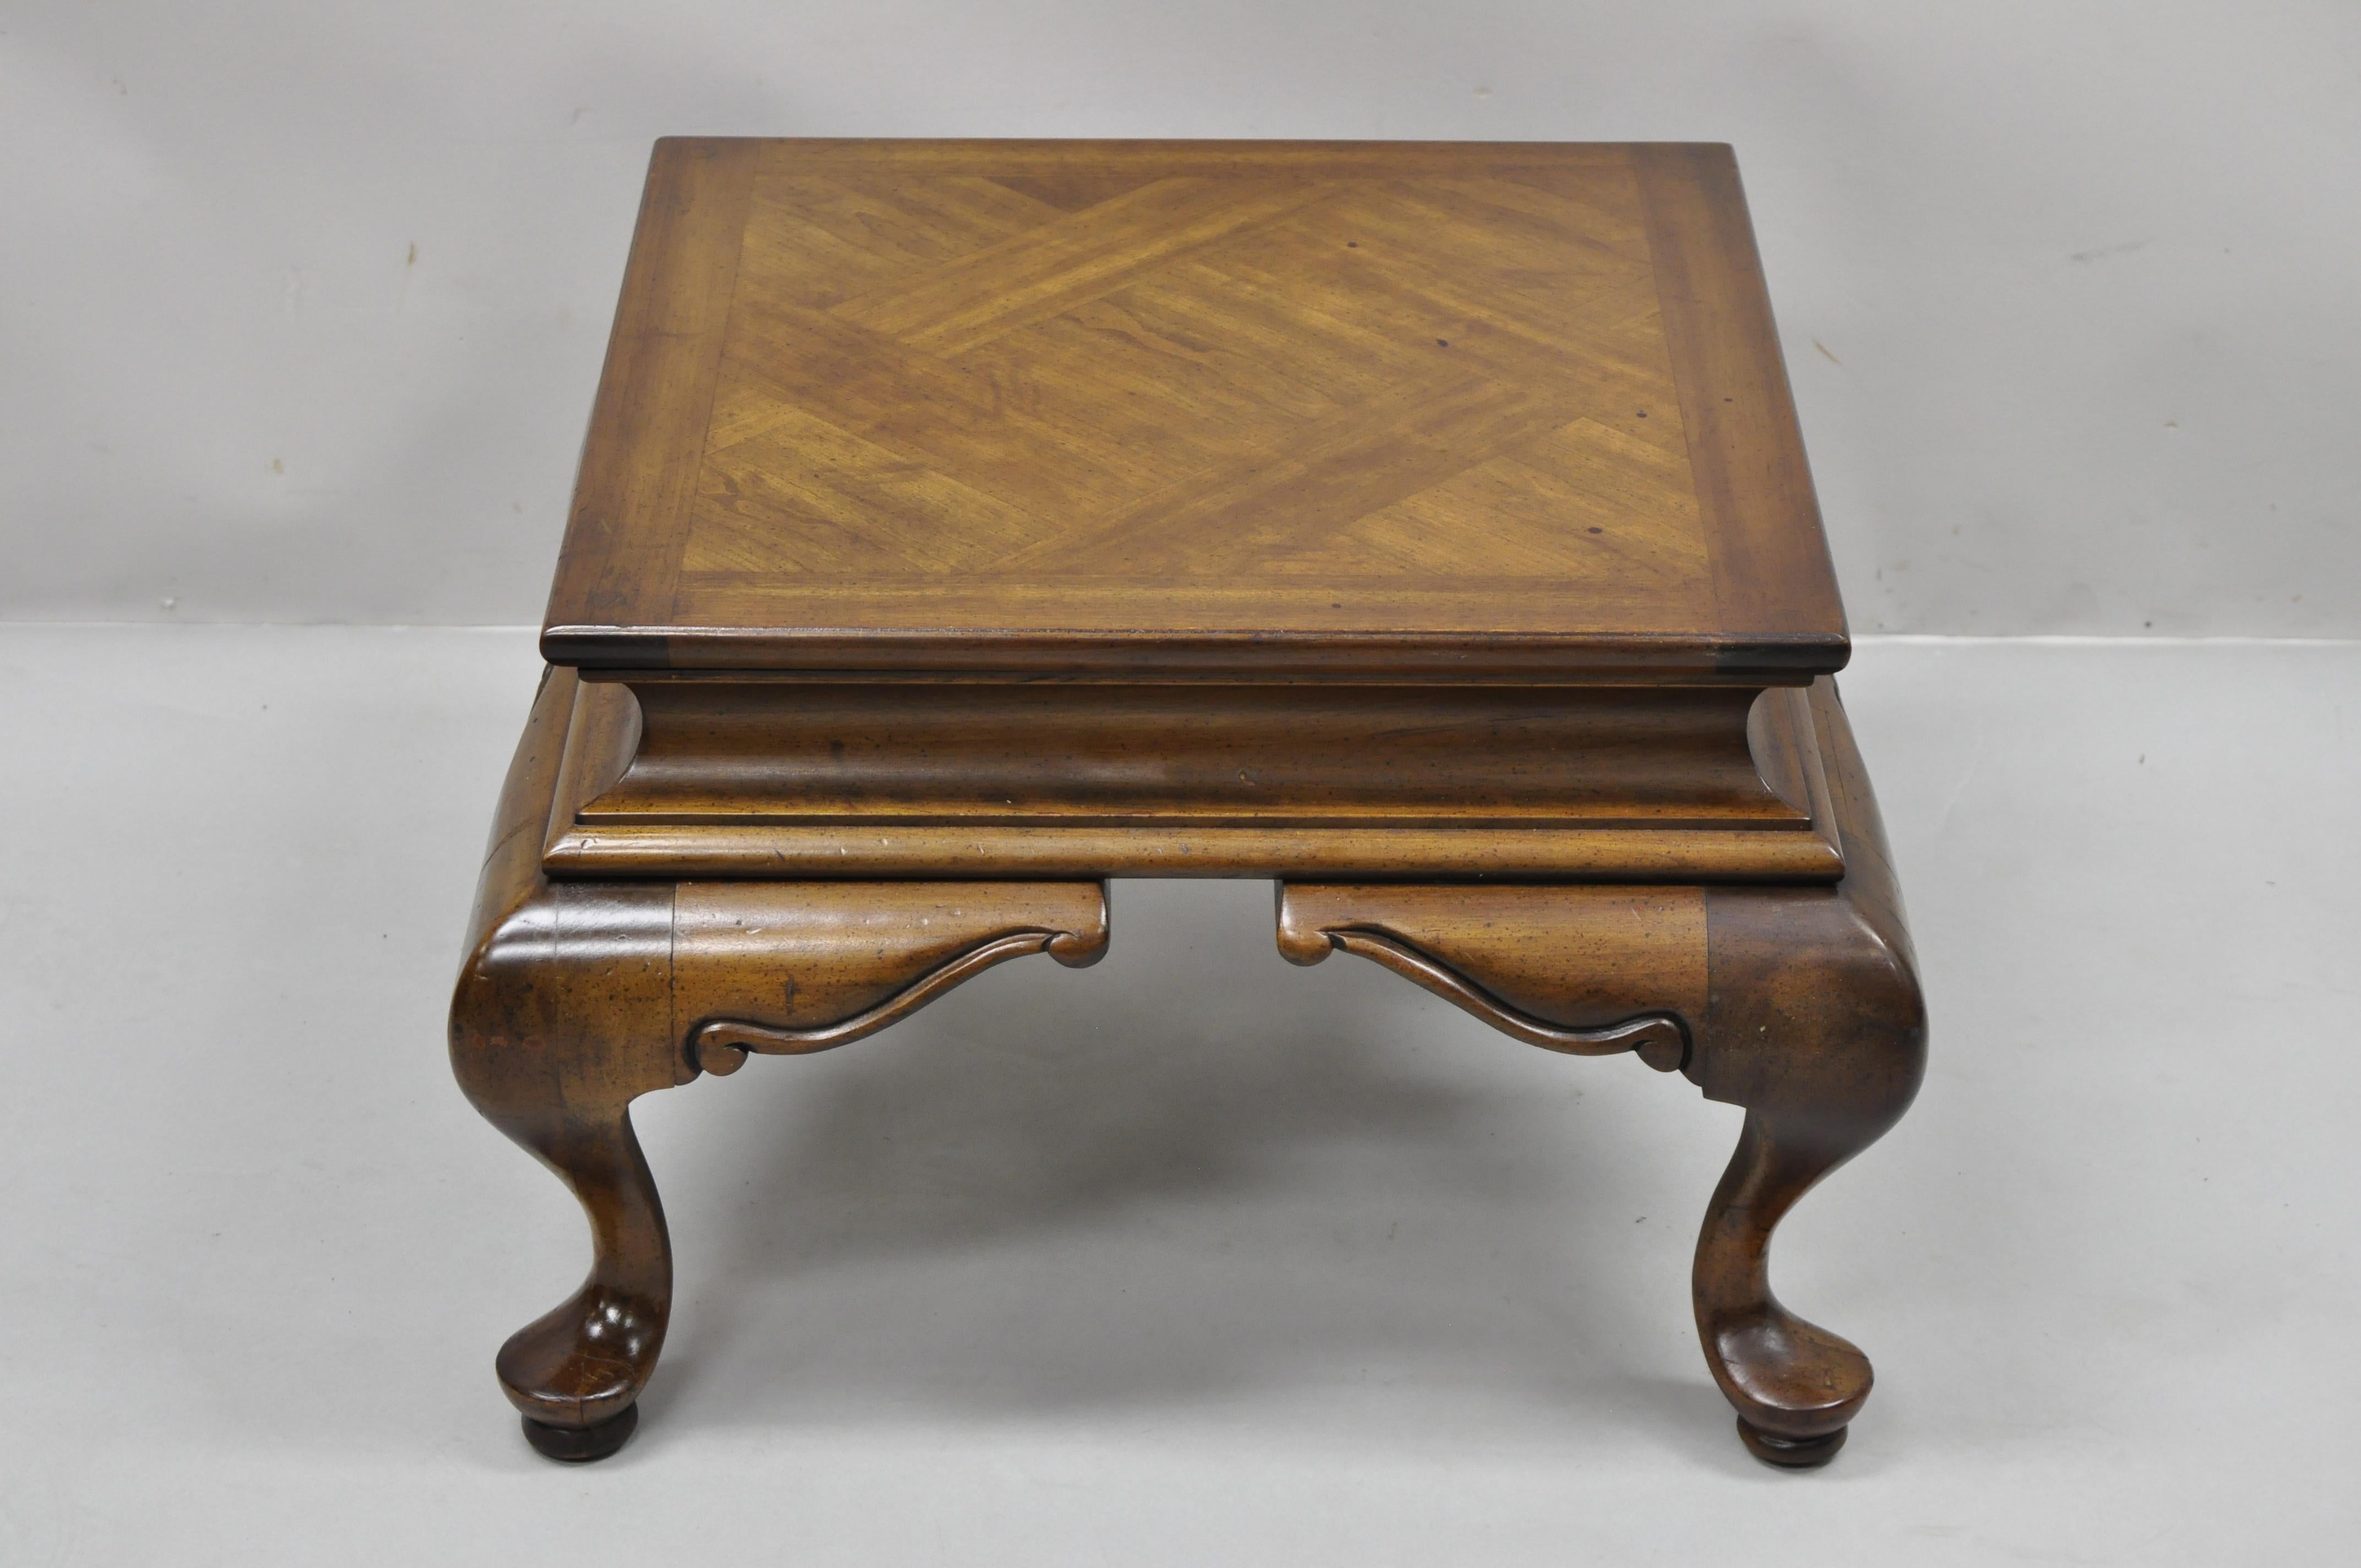 Vintage English Queen Anne low parquetry inlay pedestal stand side table. Item features solid wood construction, beautiful wood grain, distressed finish, shapely Queen Anne legs, quality American craftsmanship. Circa mid 20th century. Measurements: